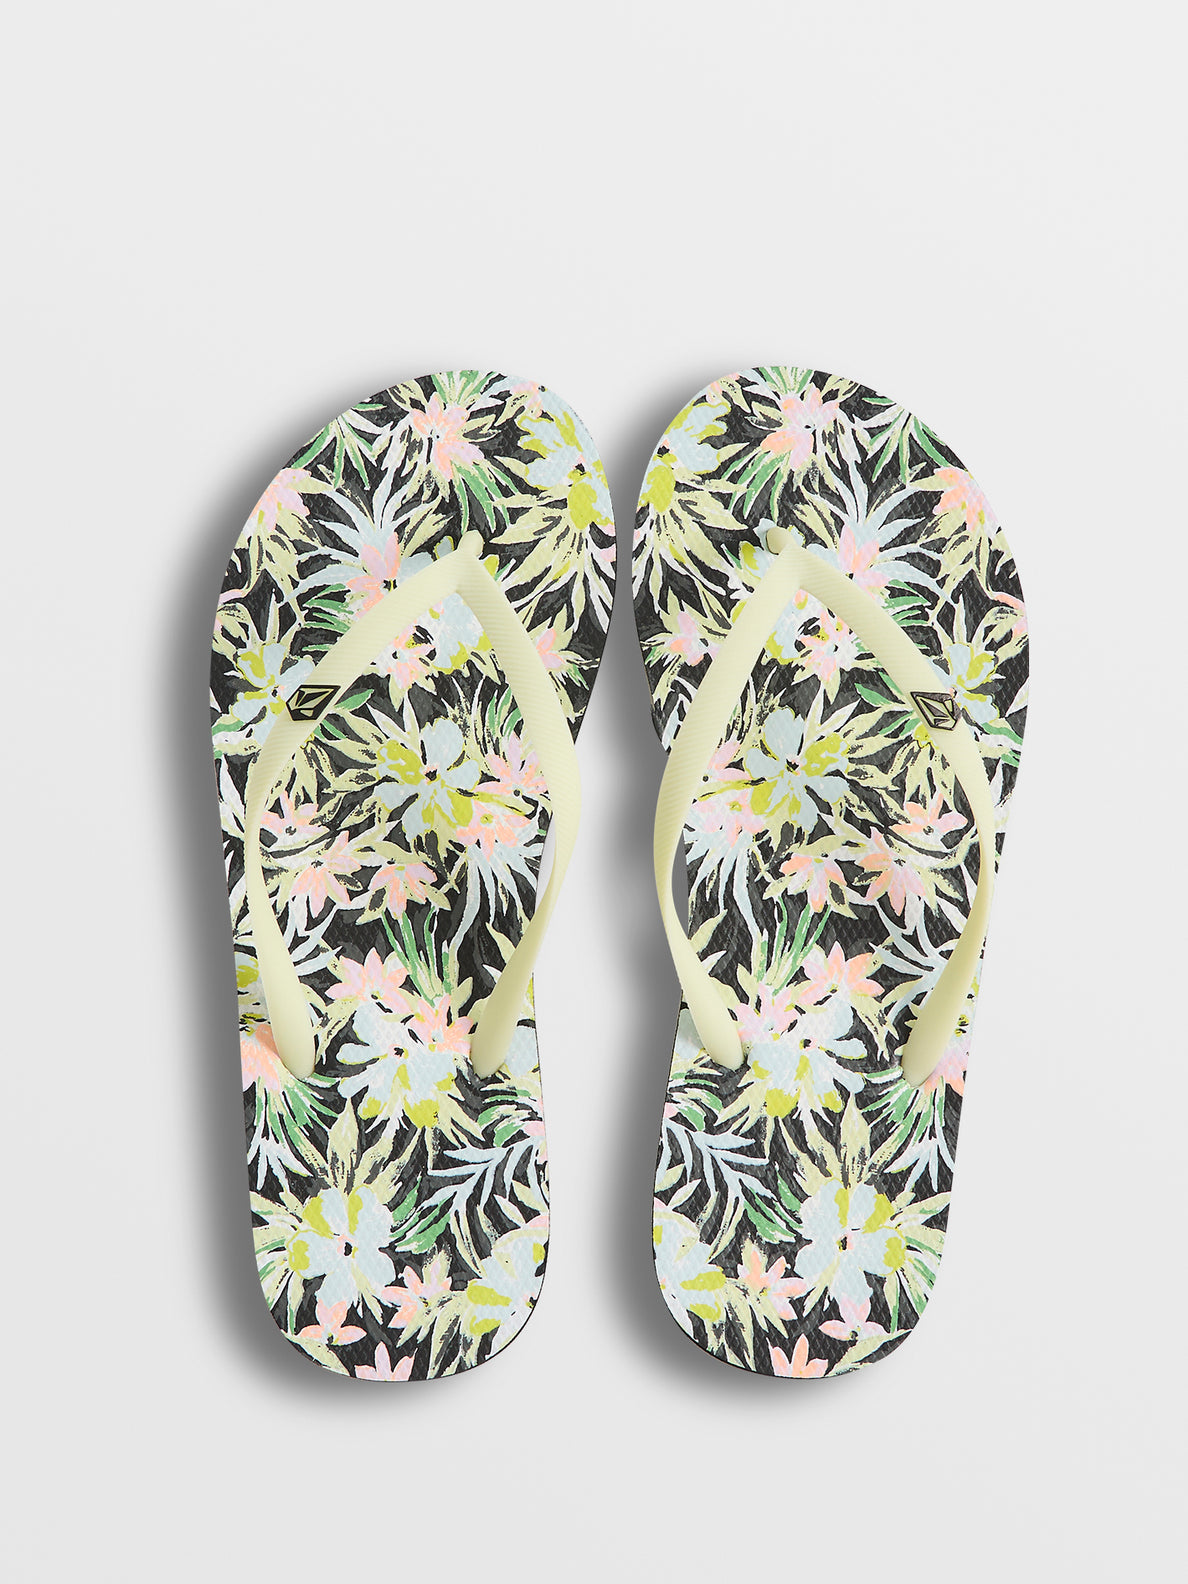 Rocking Solid Sandals - Lime Ice